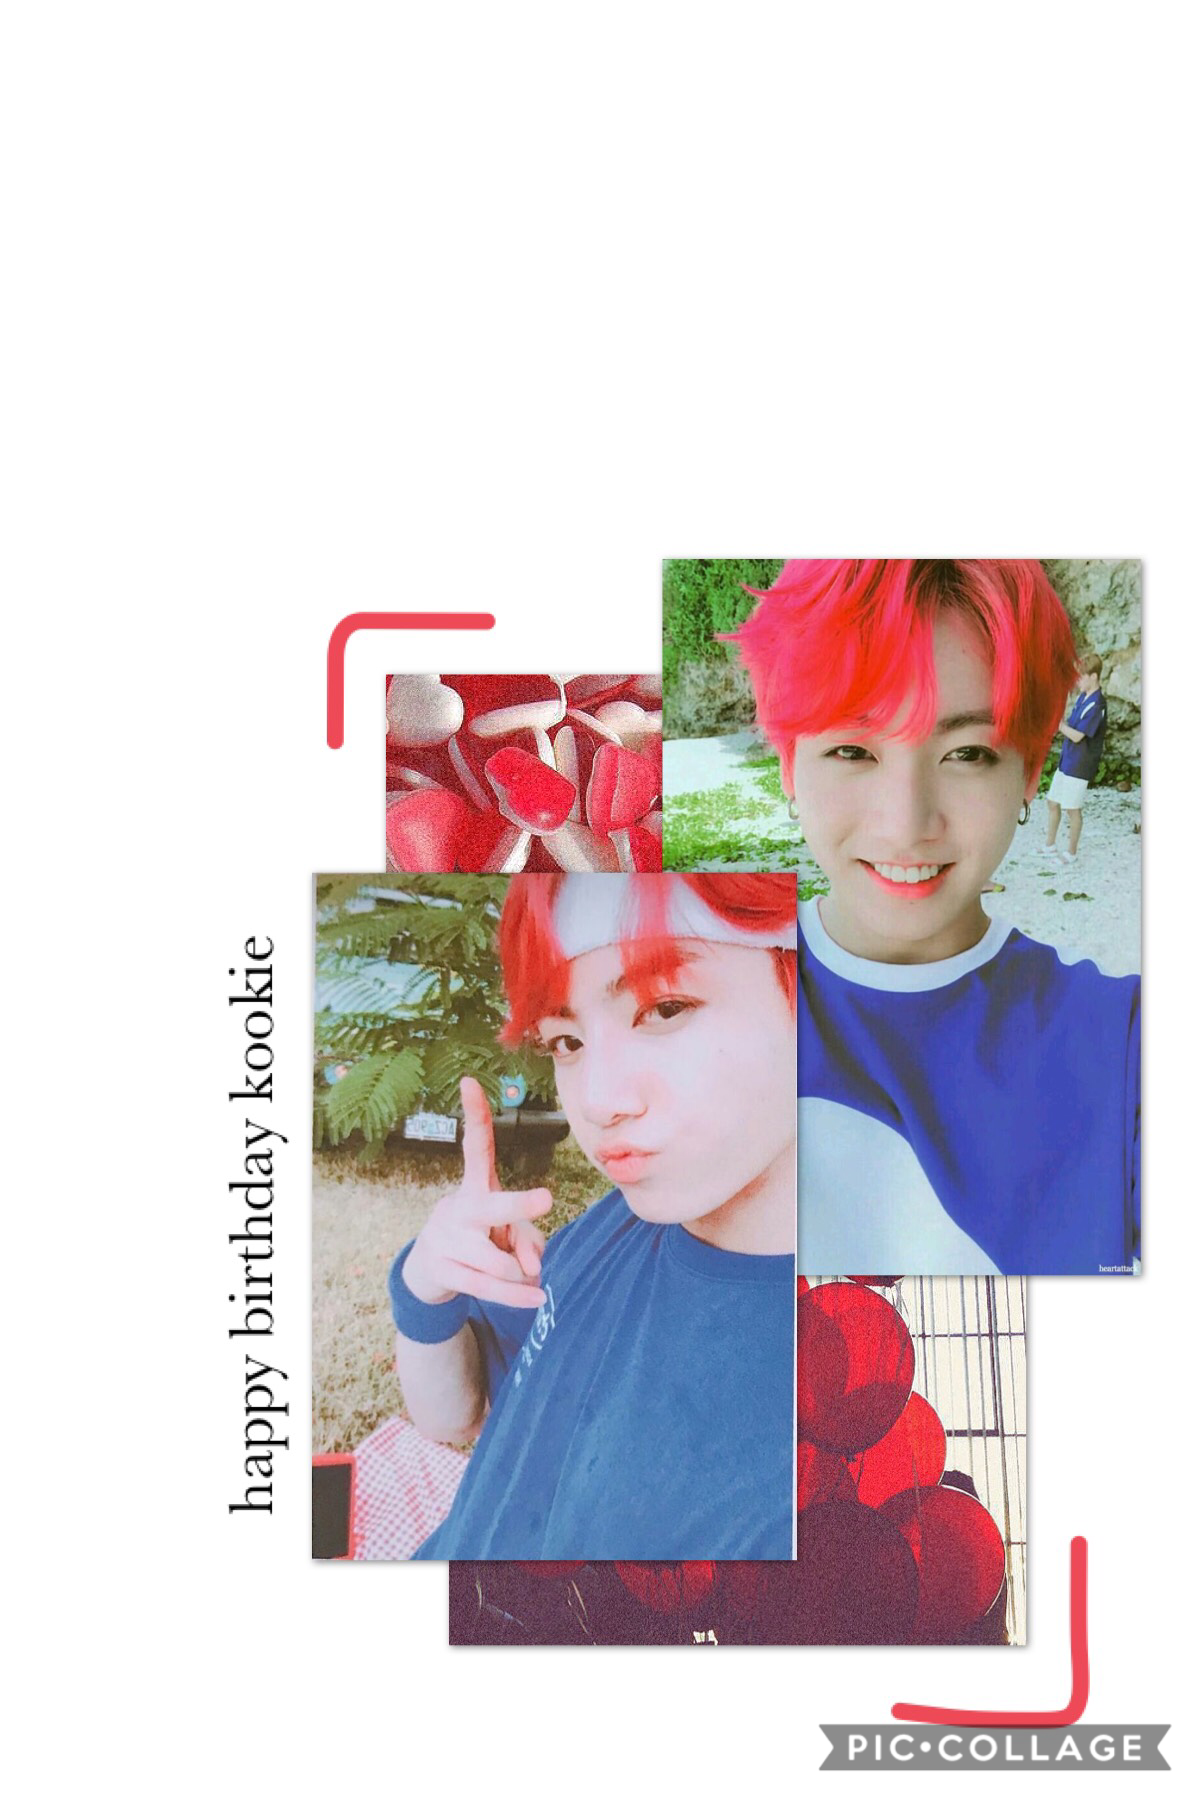 ughhhhh this is so lateeeee😭 at least I made one.

anyway happy birthday jungkook❤️ i love him so much such a cute maknae and he’s grown so much since he started at bighit. i’m so proud of him~